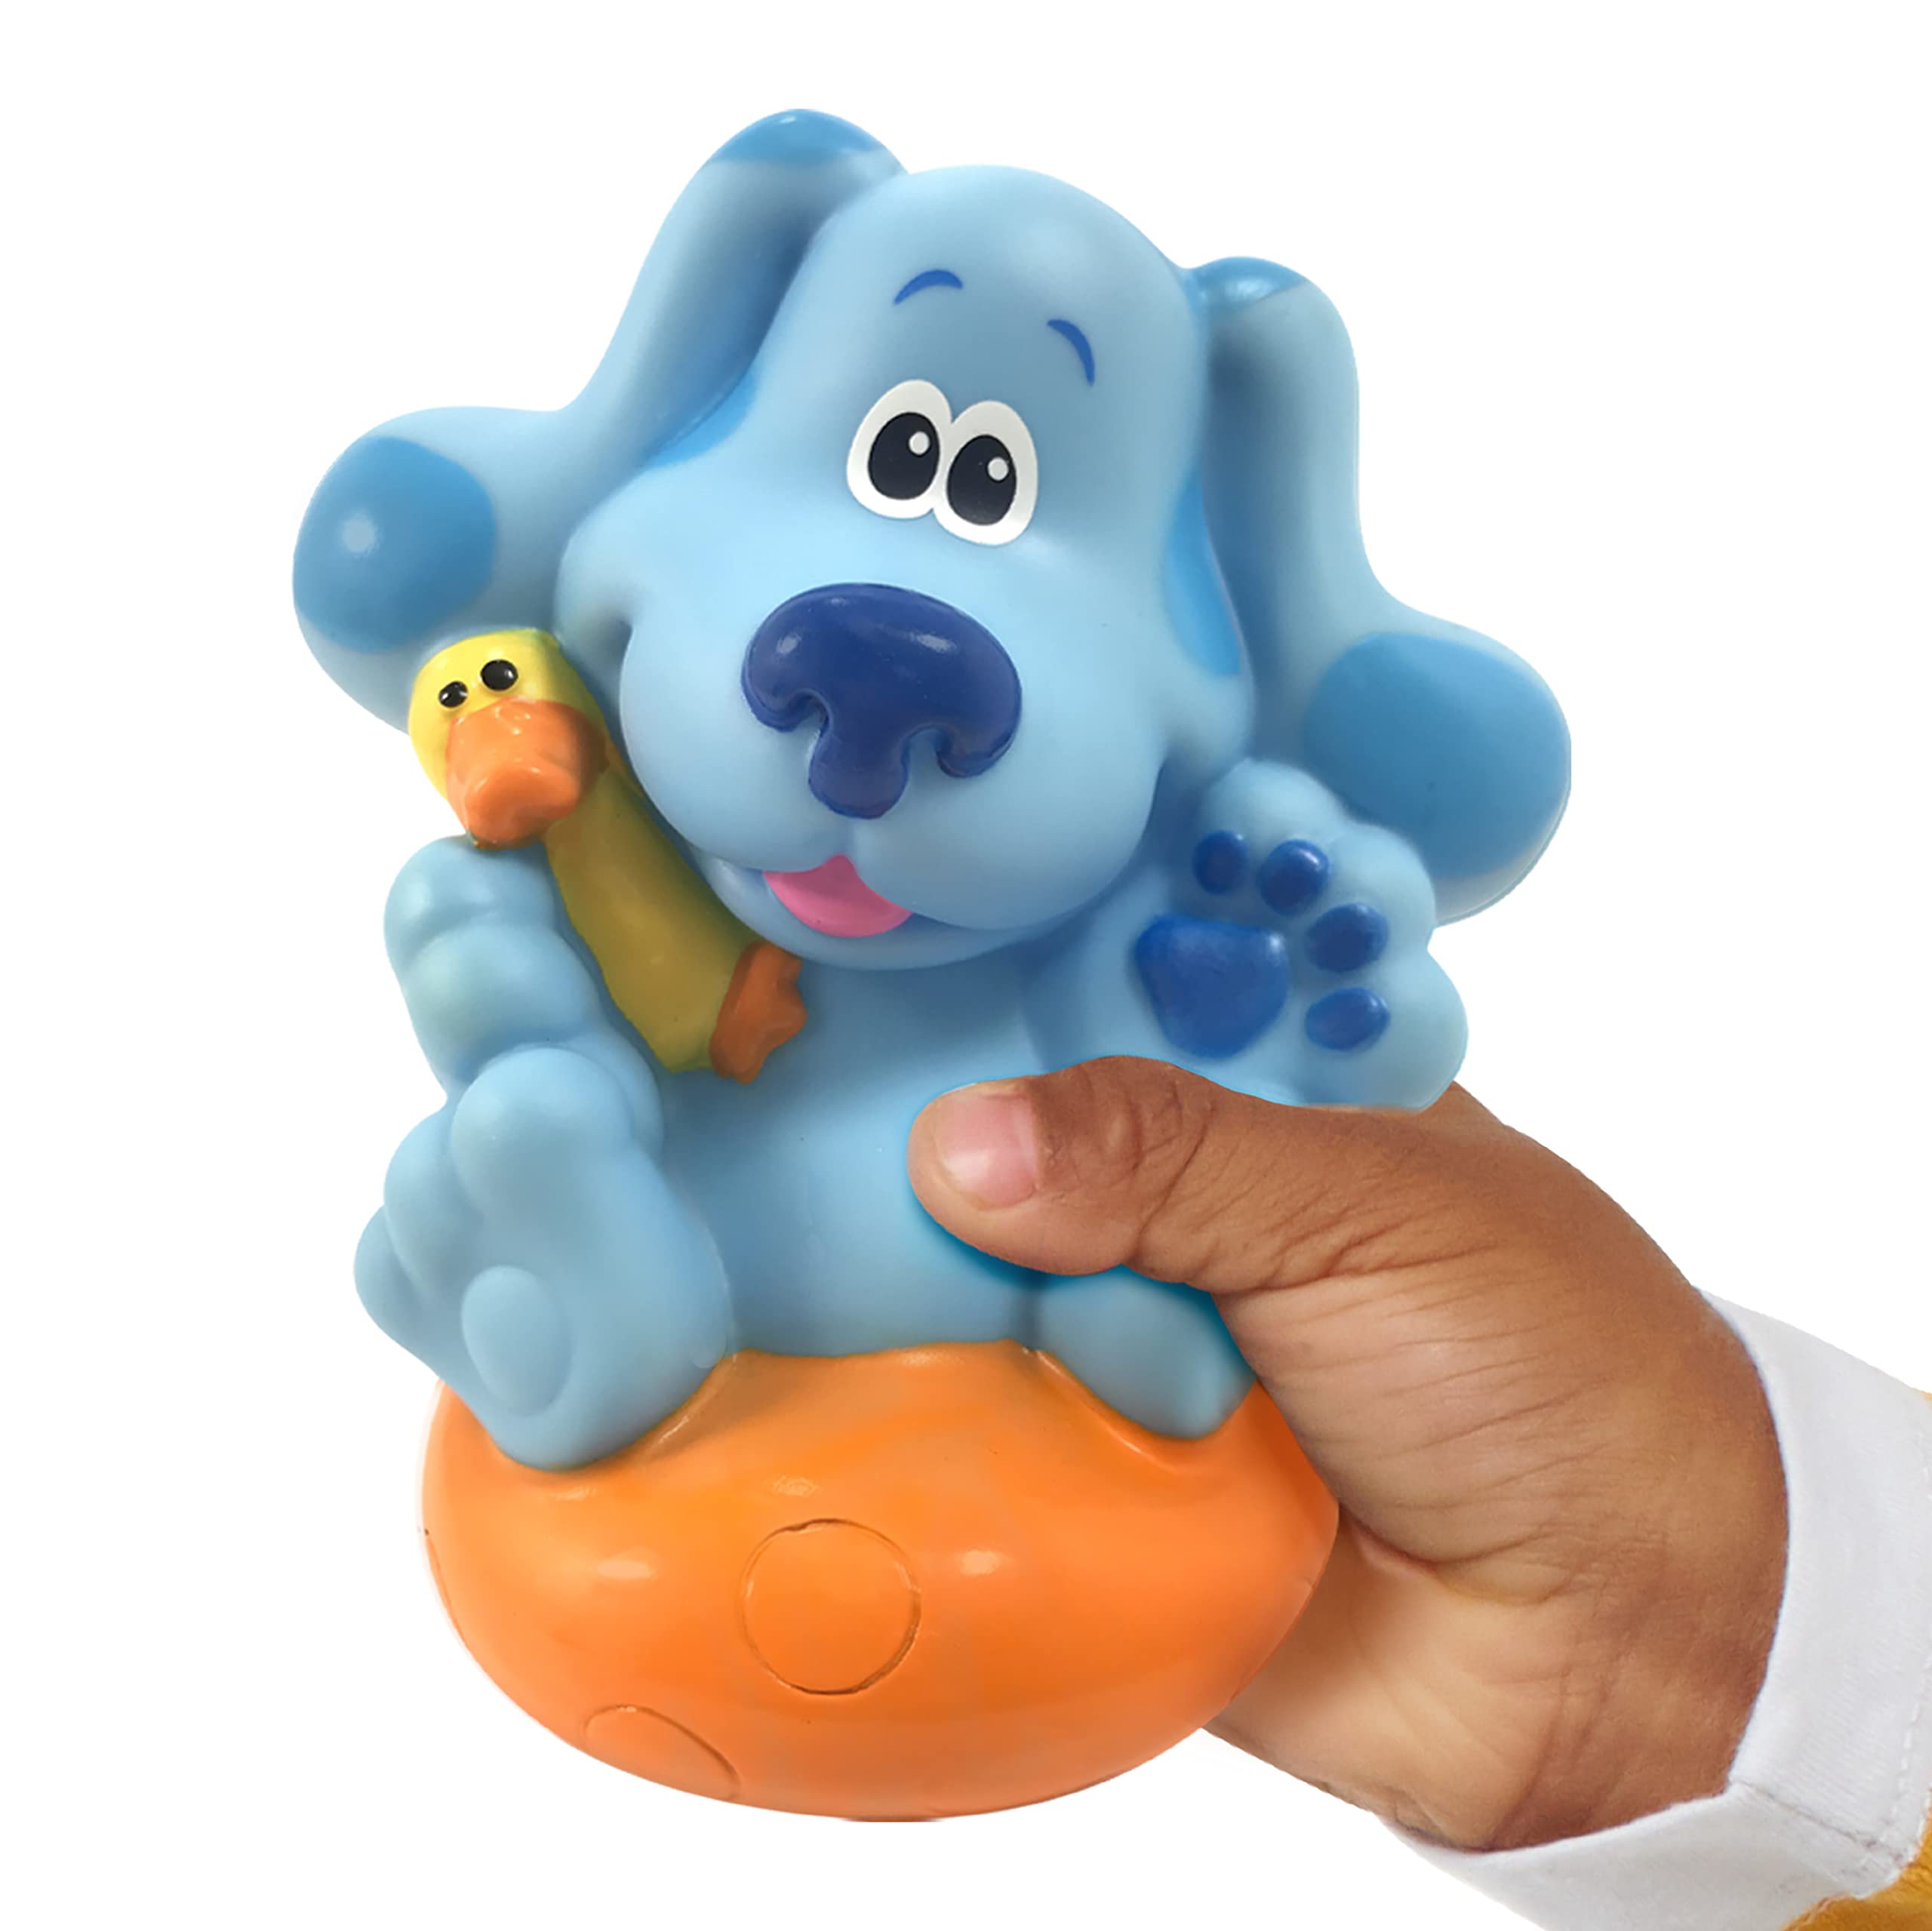 Blue's Clues & You! Deluxe Bath Toy Set, Includes Blue, Magenta, and Slippery Soap Water Toys, Amazon Exclusive, by Just Play